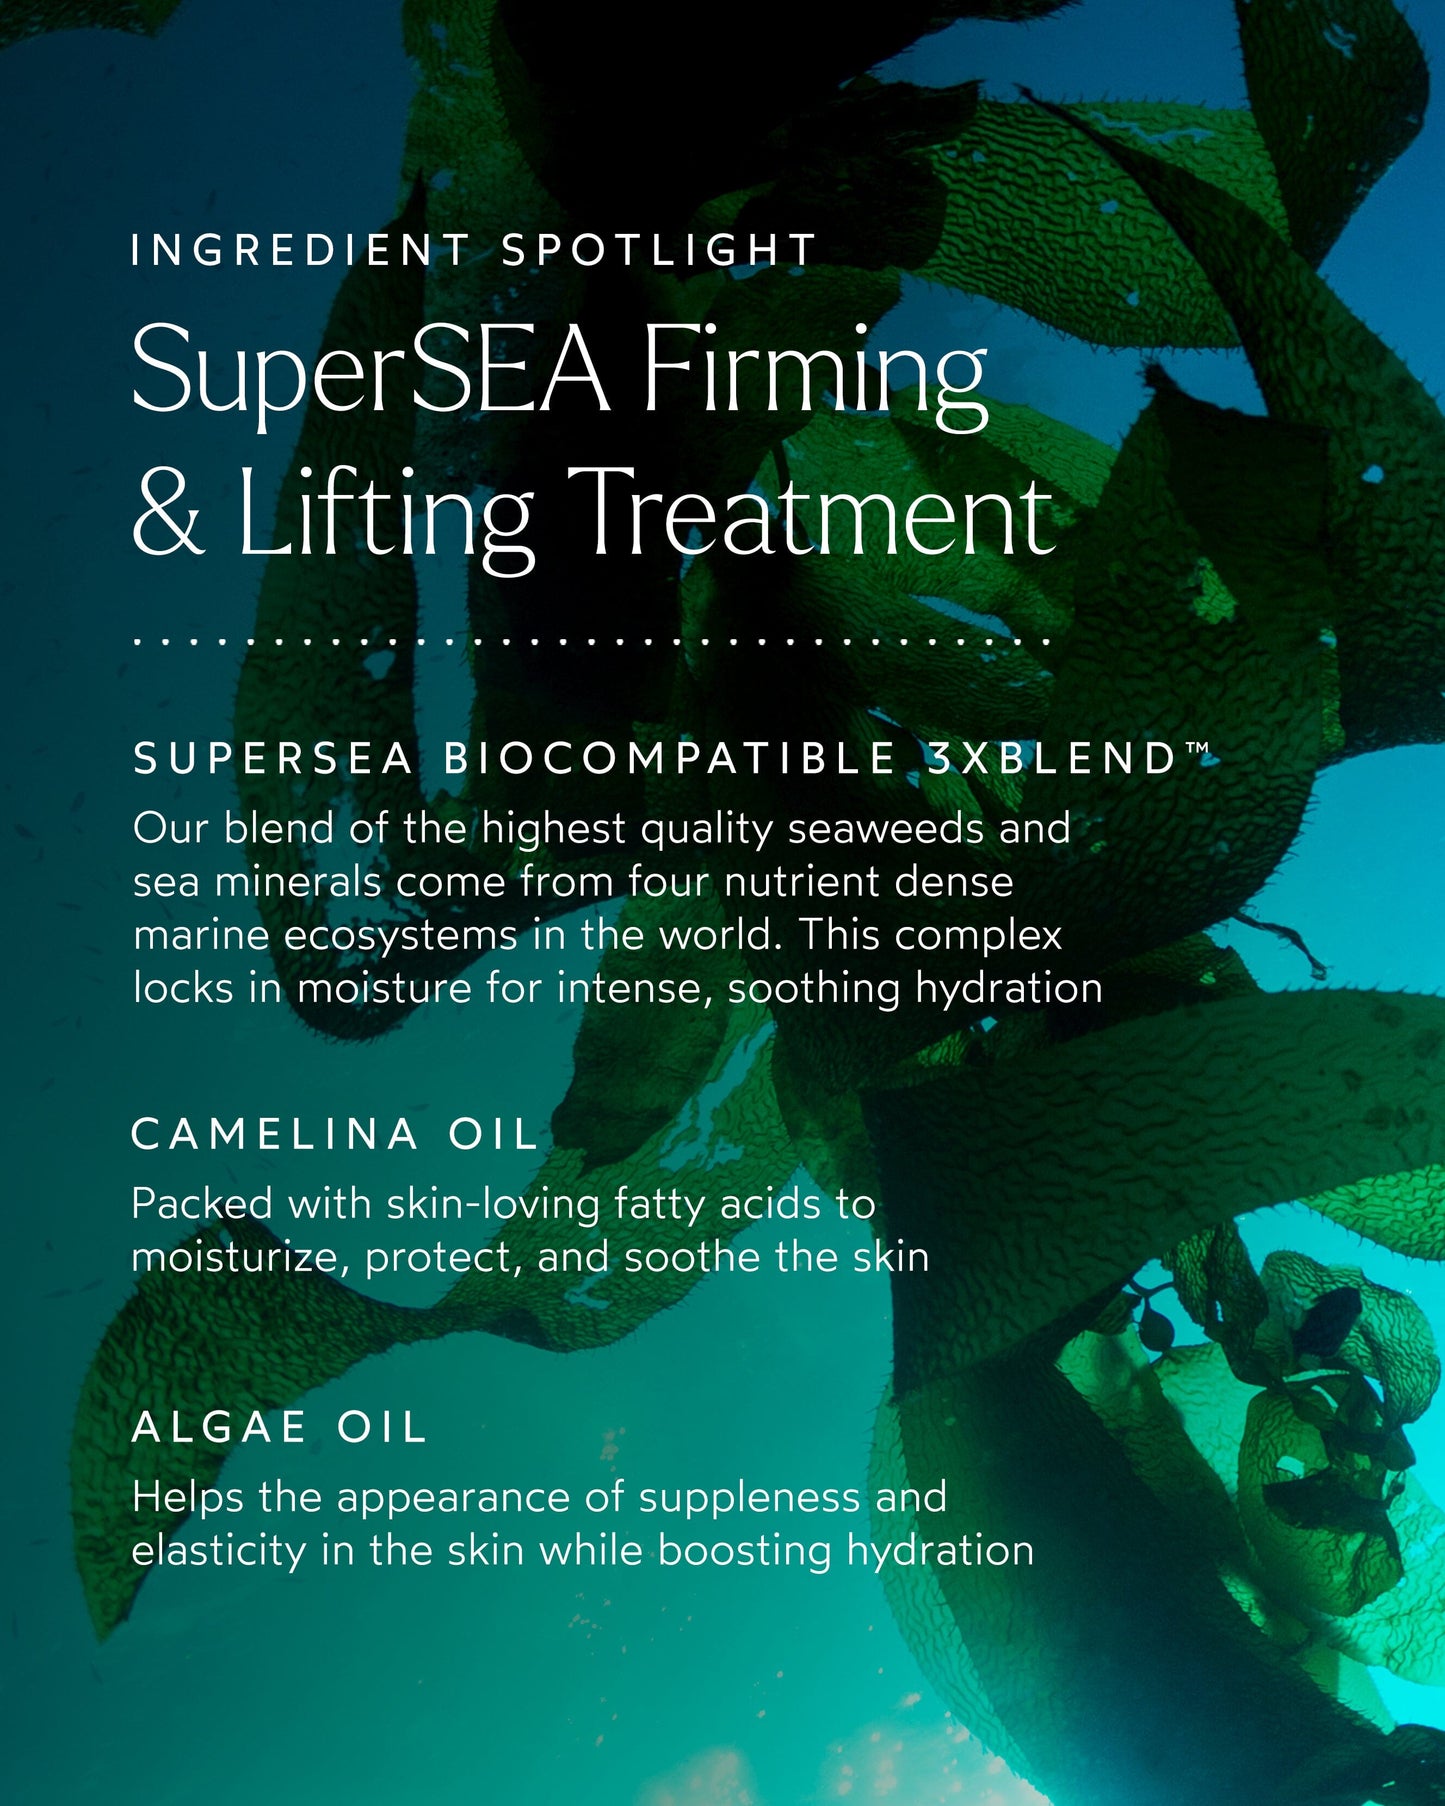 SuperSEA Firming & Lifting Treatment